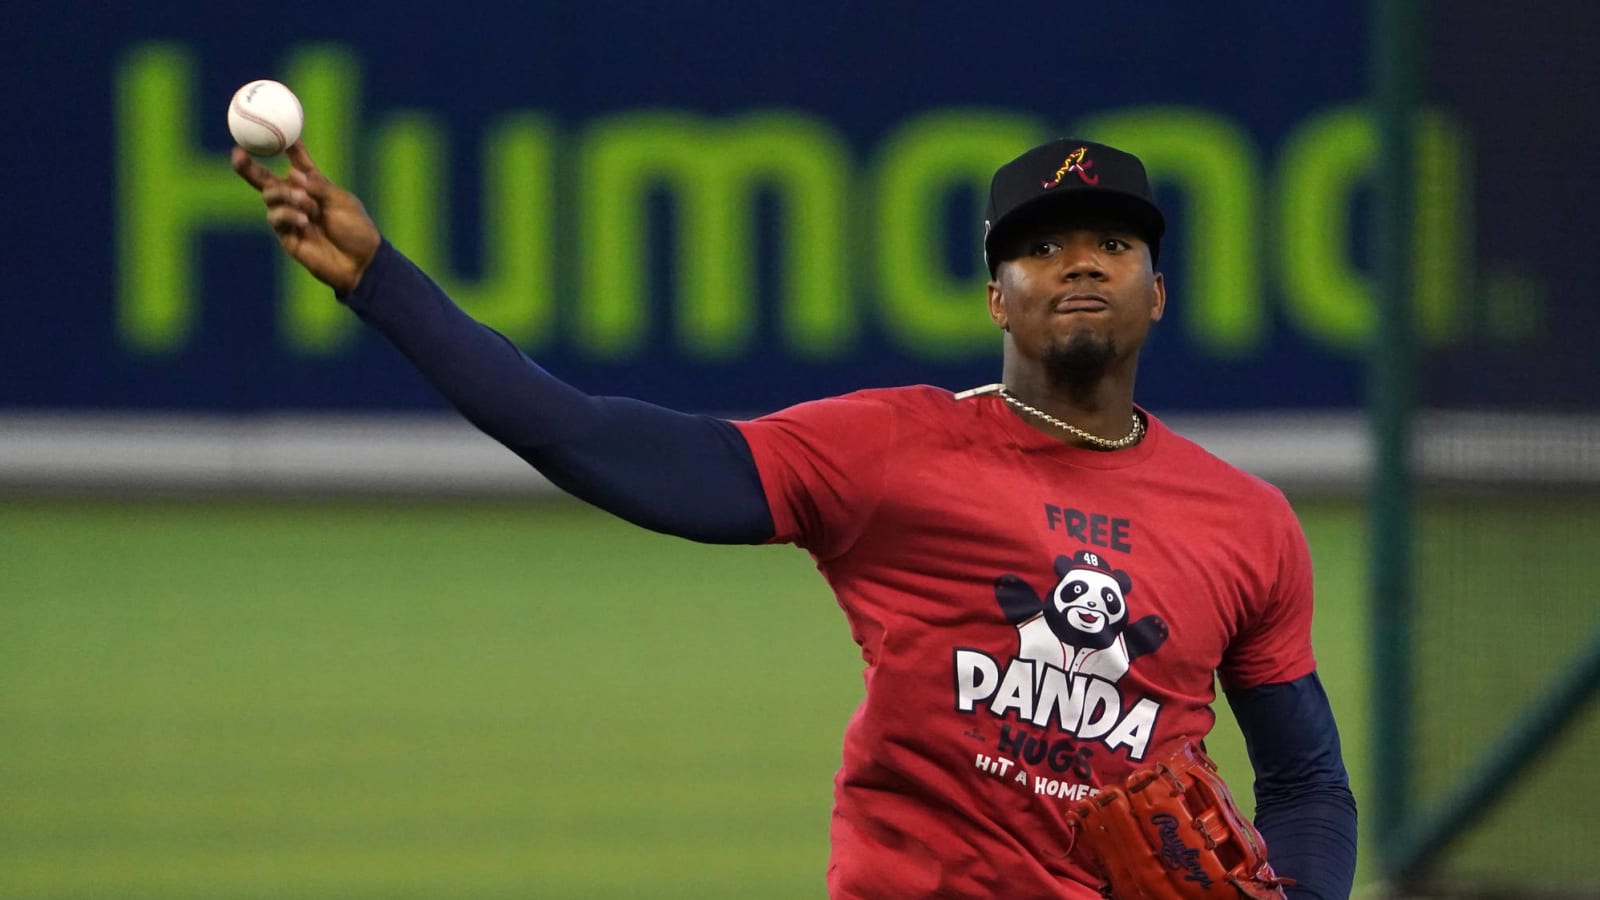 Brian Snitker doesn't think Ronald Acuna Jr.'s injury is serious